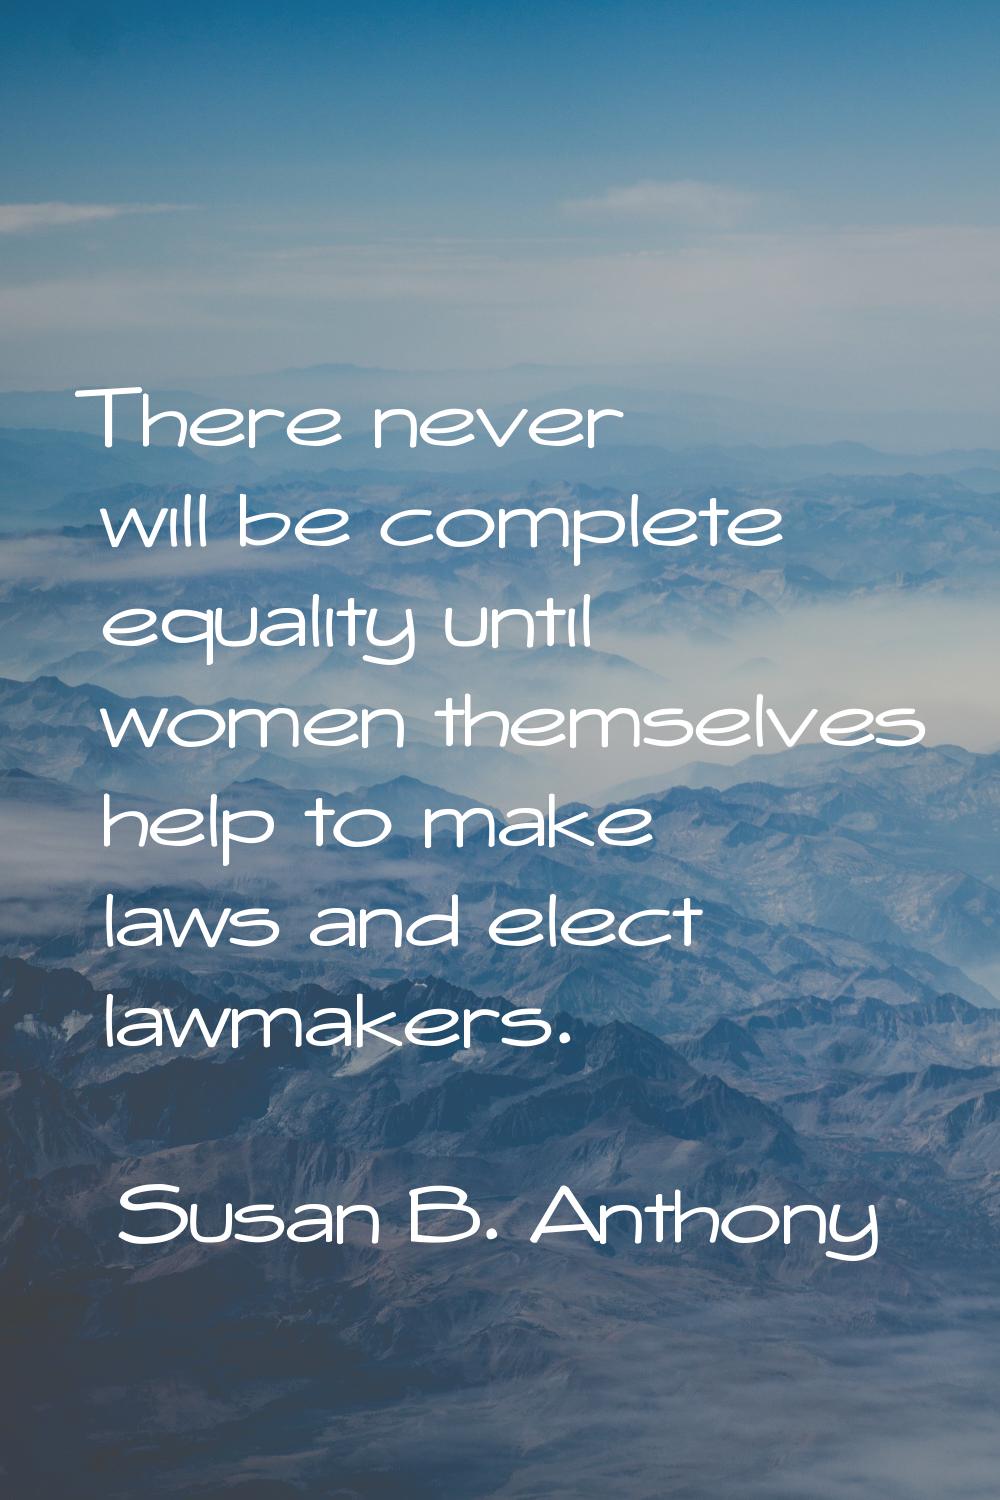 There never will be complete equality until women themselves help to make laws and elect lawmakers.